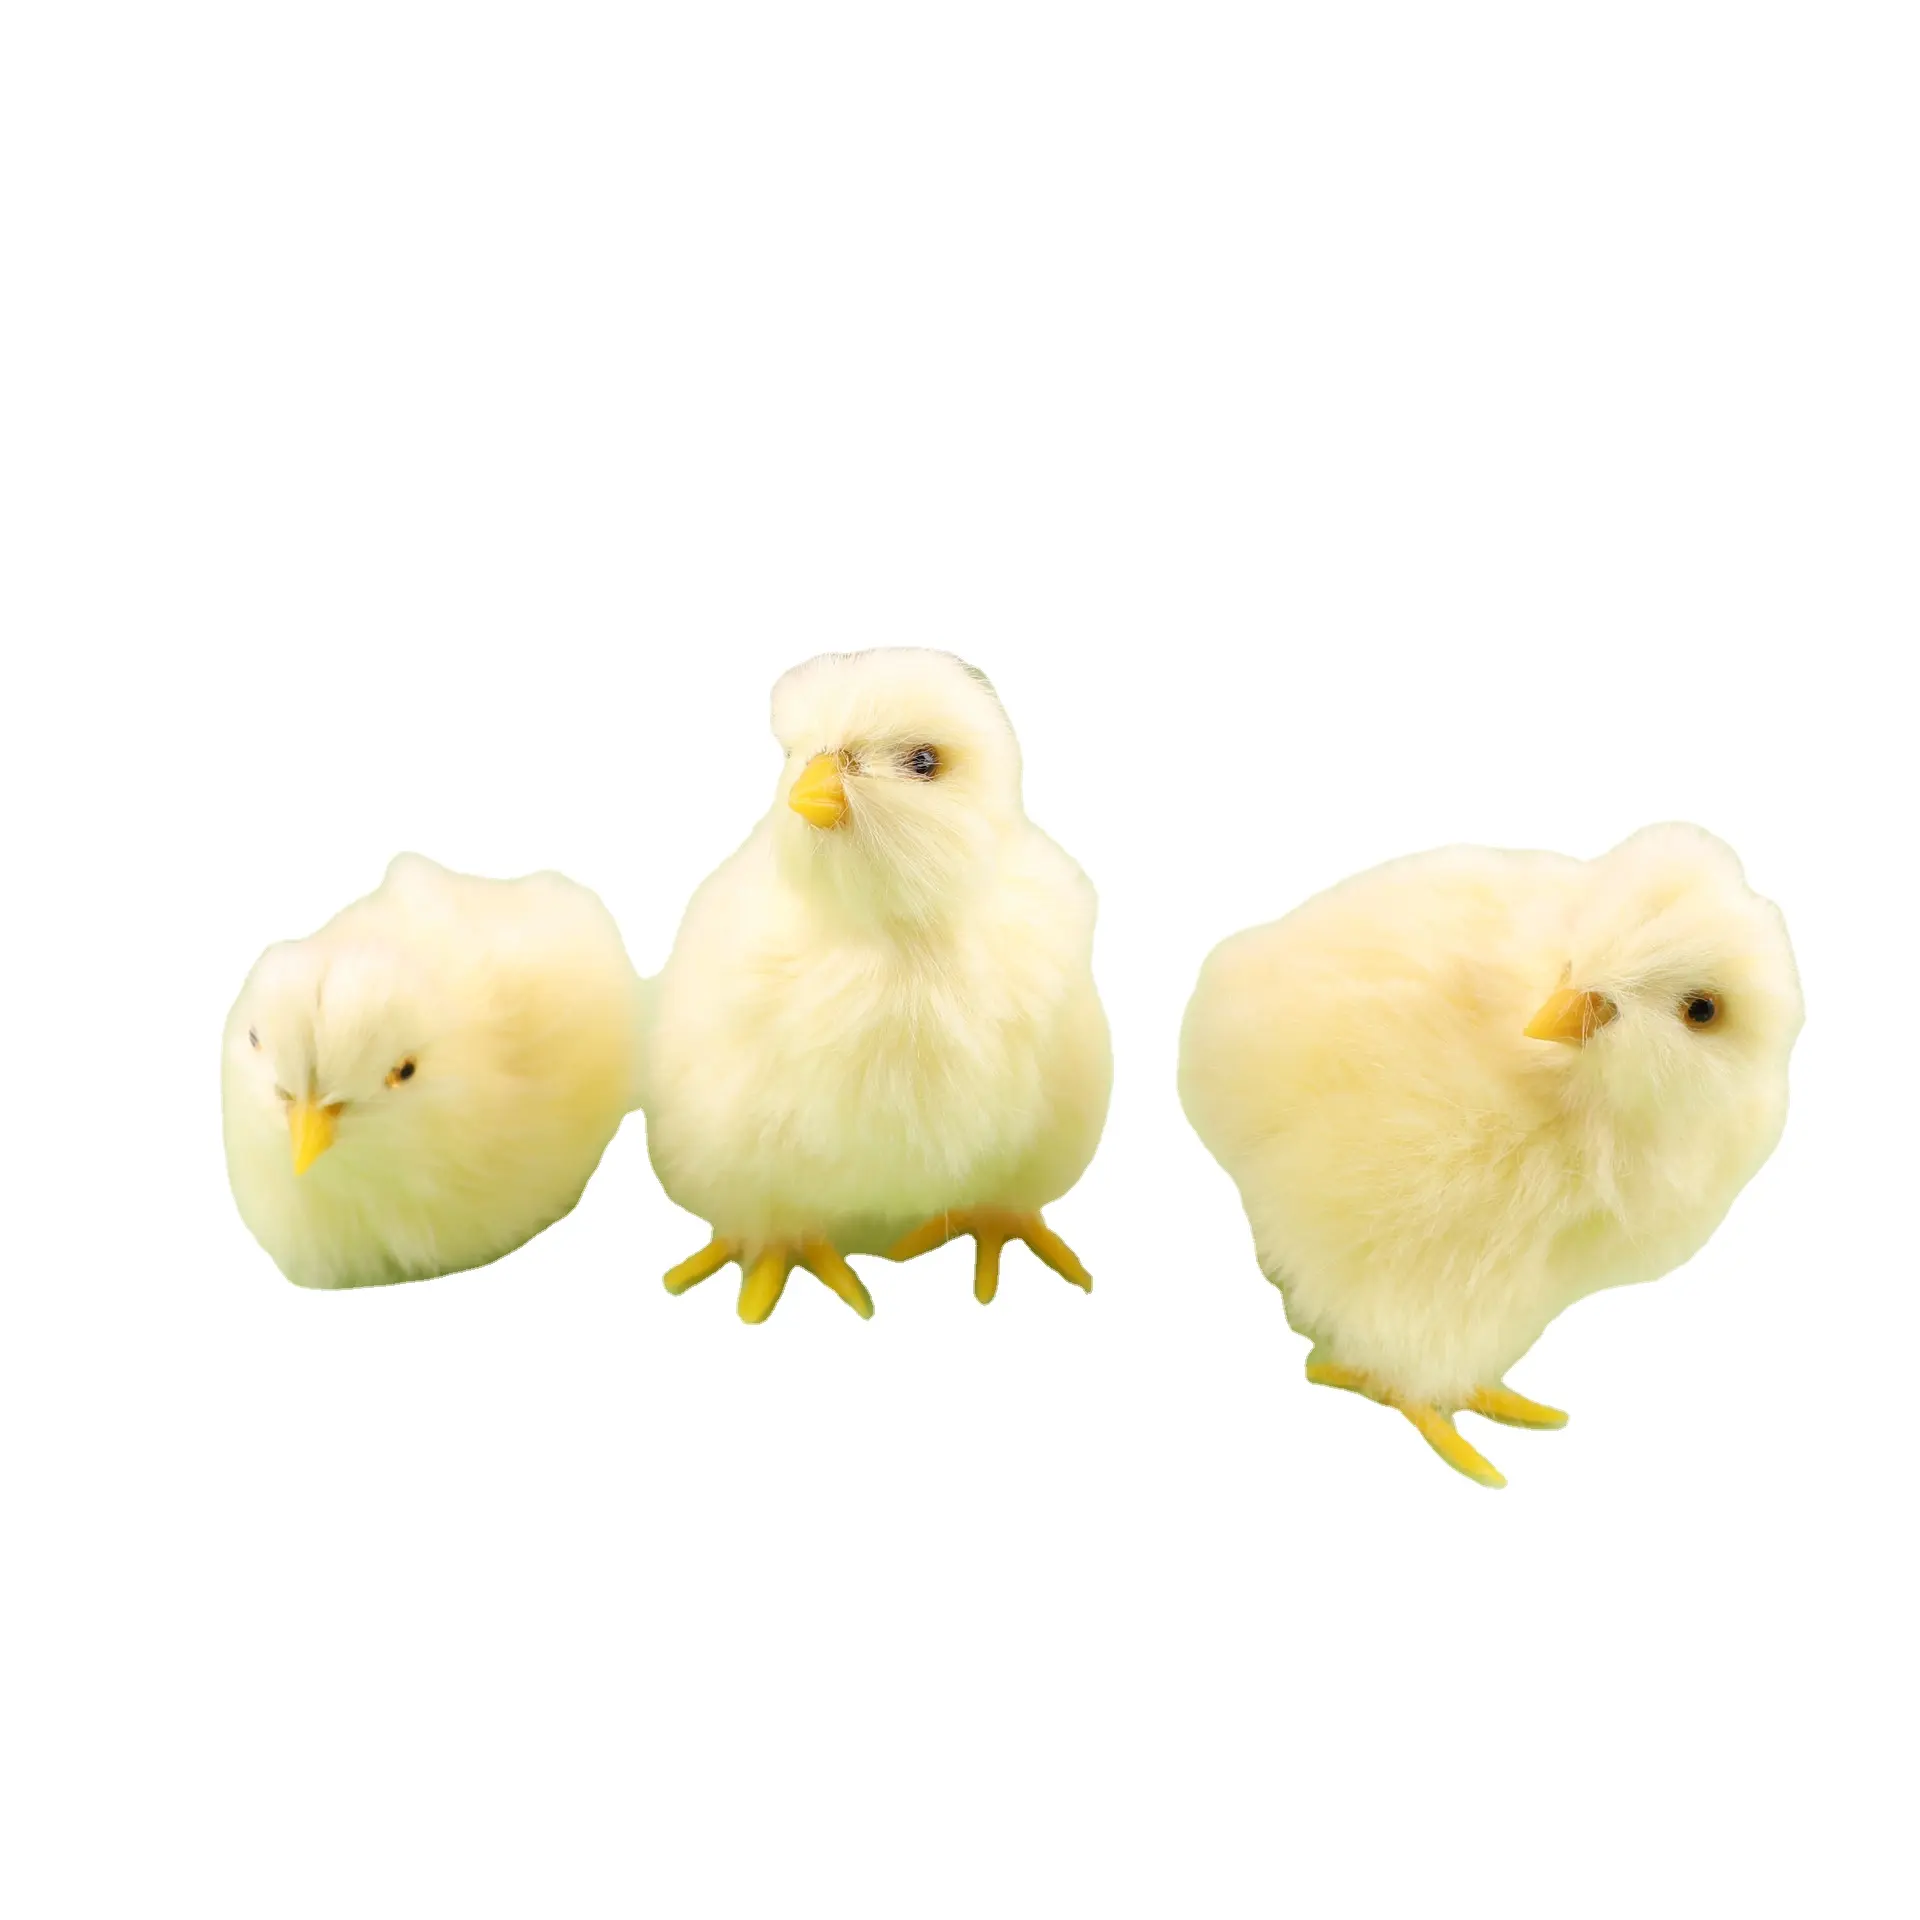 Kawaii Artificial Chicken Plush Toy Animal Chick Doll Children Teaching Easter Model Barking Chick Model Ornaments